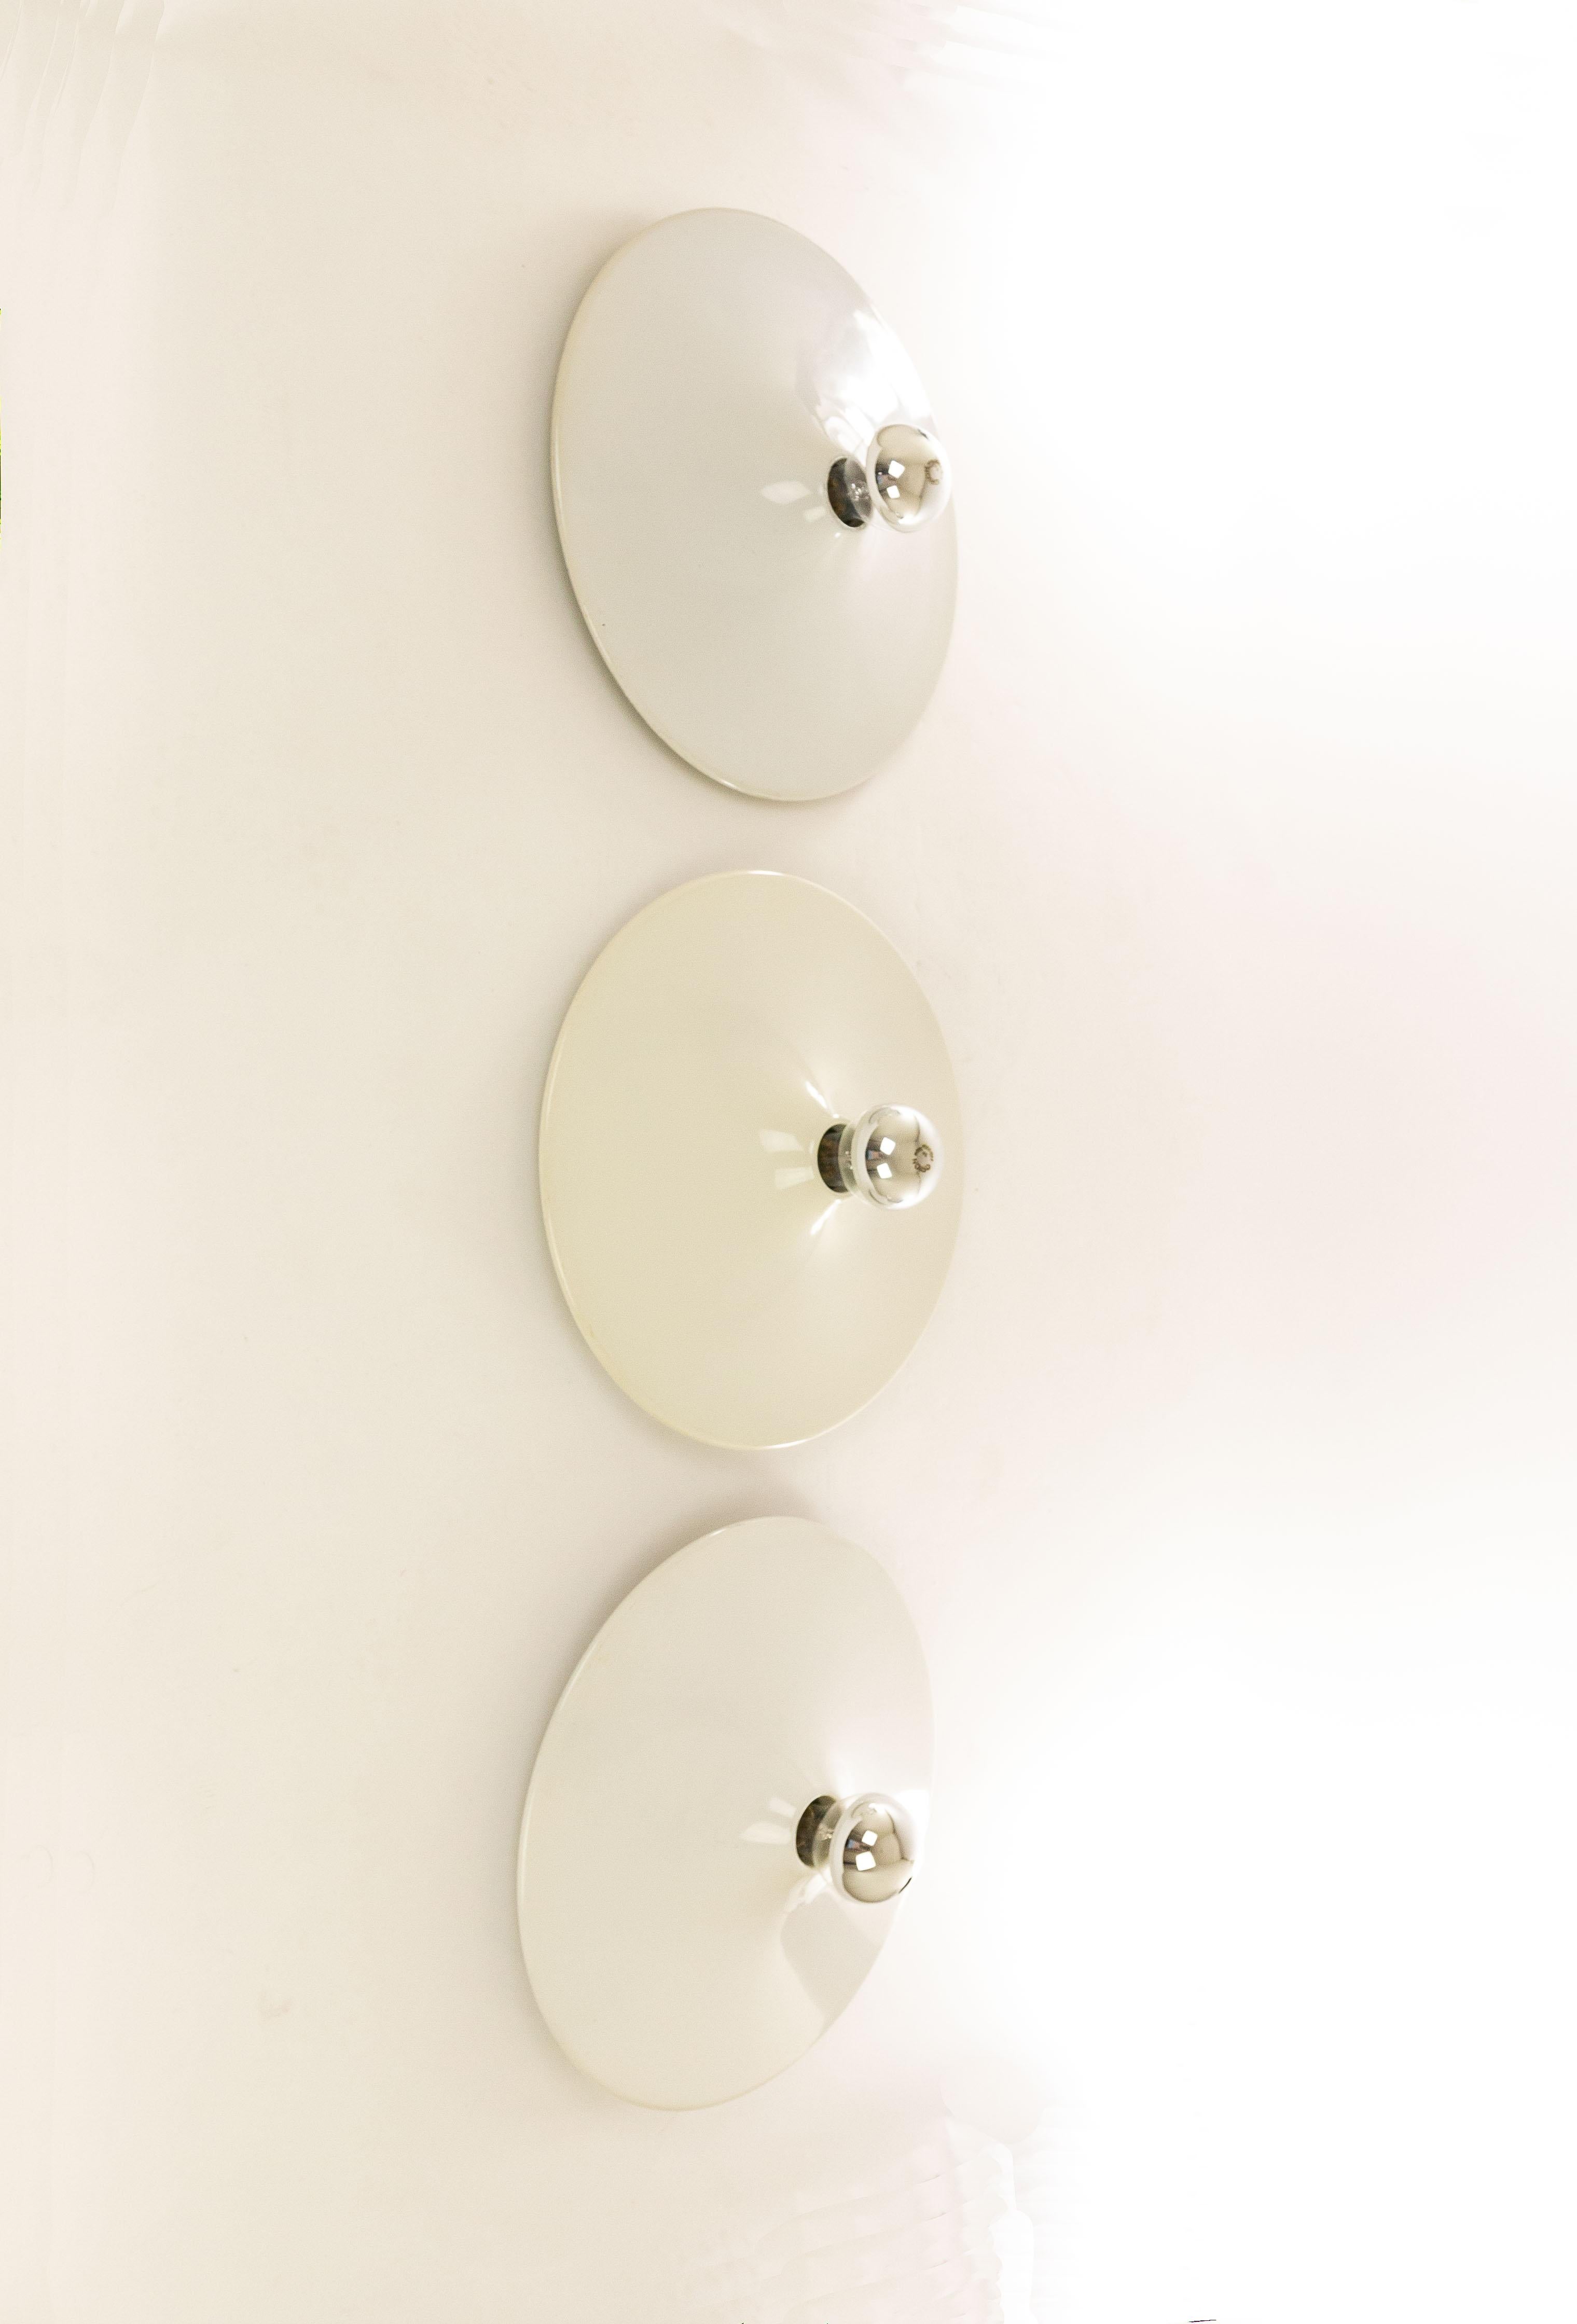 Set of three off-white aluminium ceiling or wall lamps by Gianluigi Gorgoni for Italian lighting manufacturer Stilnovo.

This model, that is also known under the name Disco, was produced in three different colors: green, white and red. The